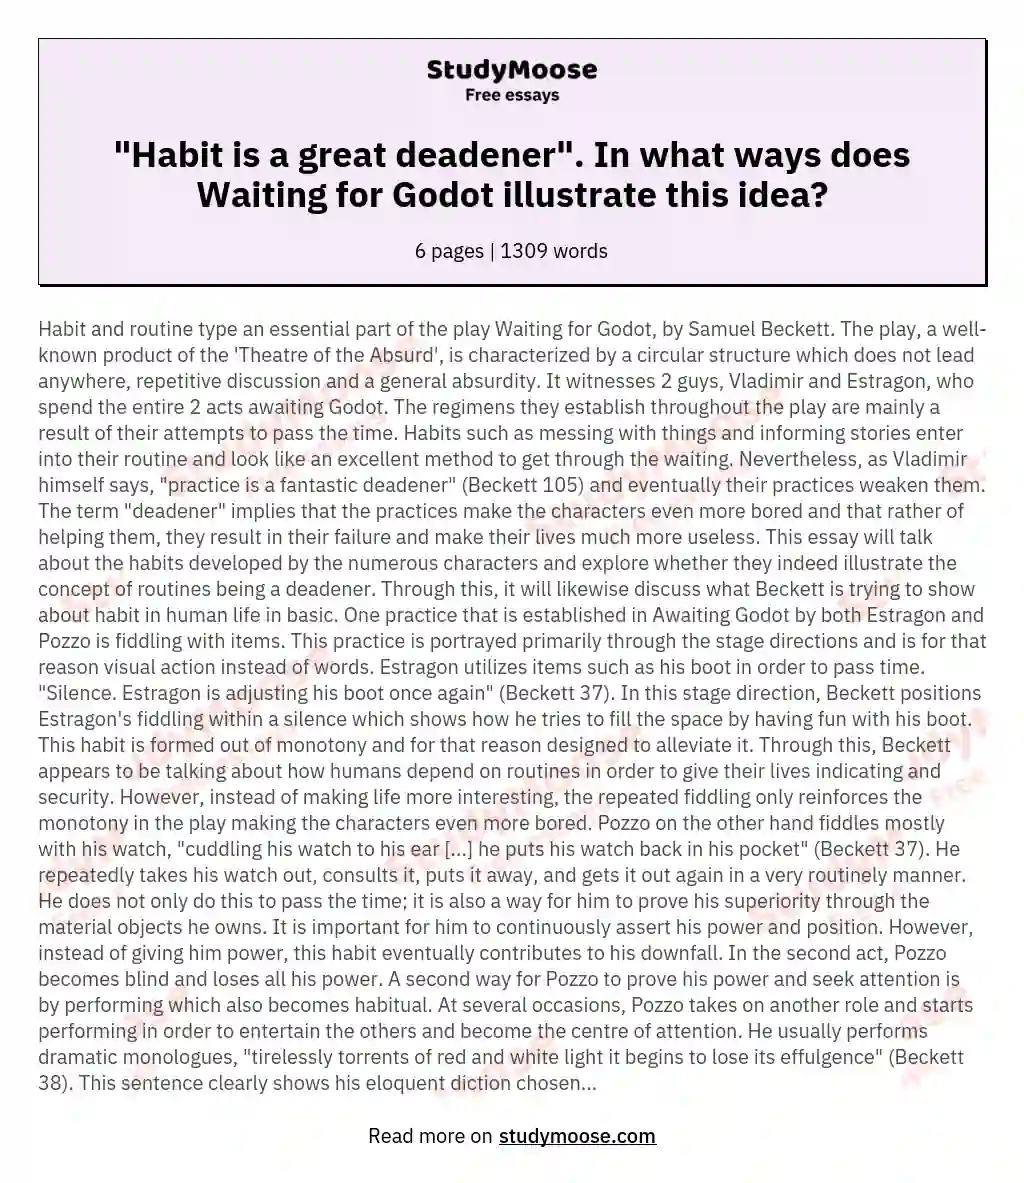 "Habit is a great deadener". In what ways does Waiting for Godot illustrate this idea?